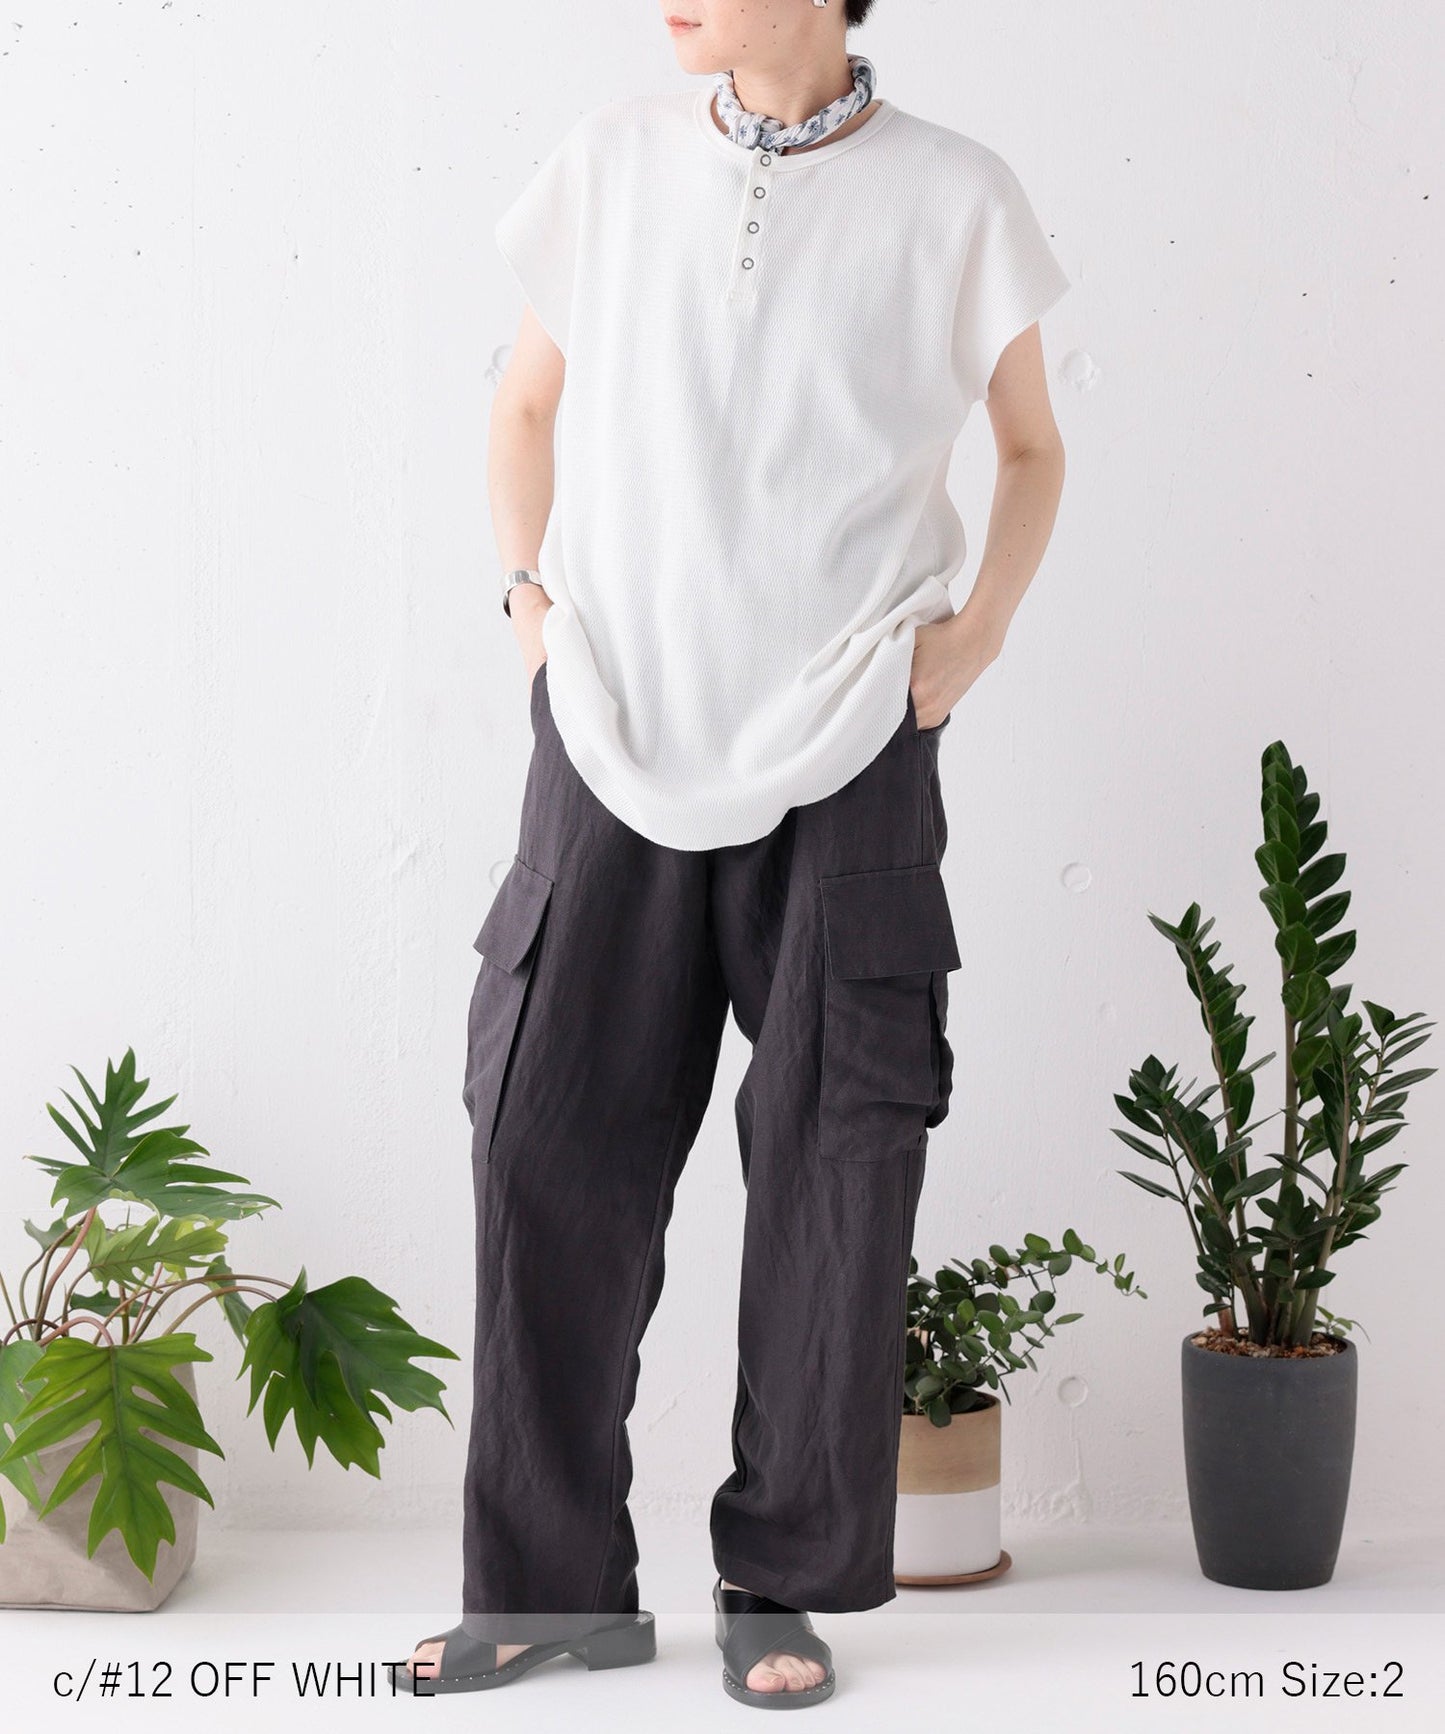 OUTLET [Eco-friendly material] OG HONEYCOMB TANKTOP Organic cotton Set-up available [145-165cm]